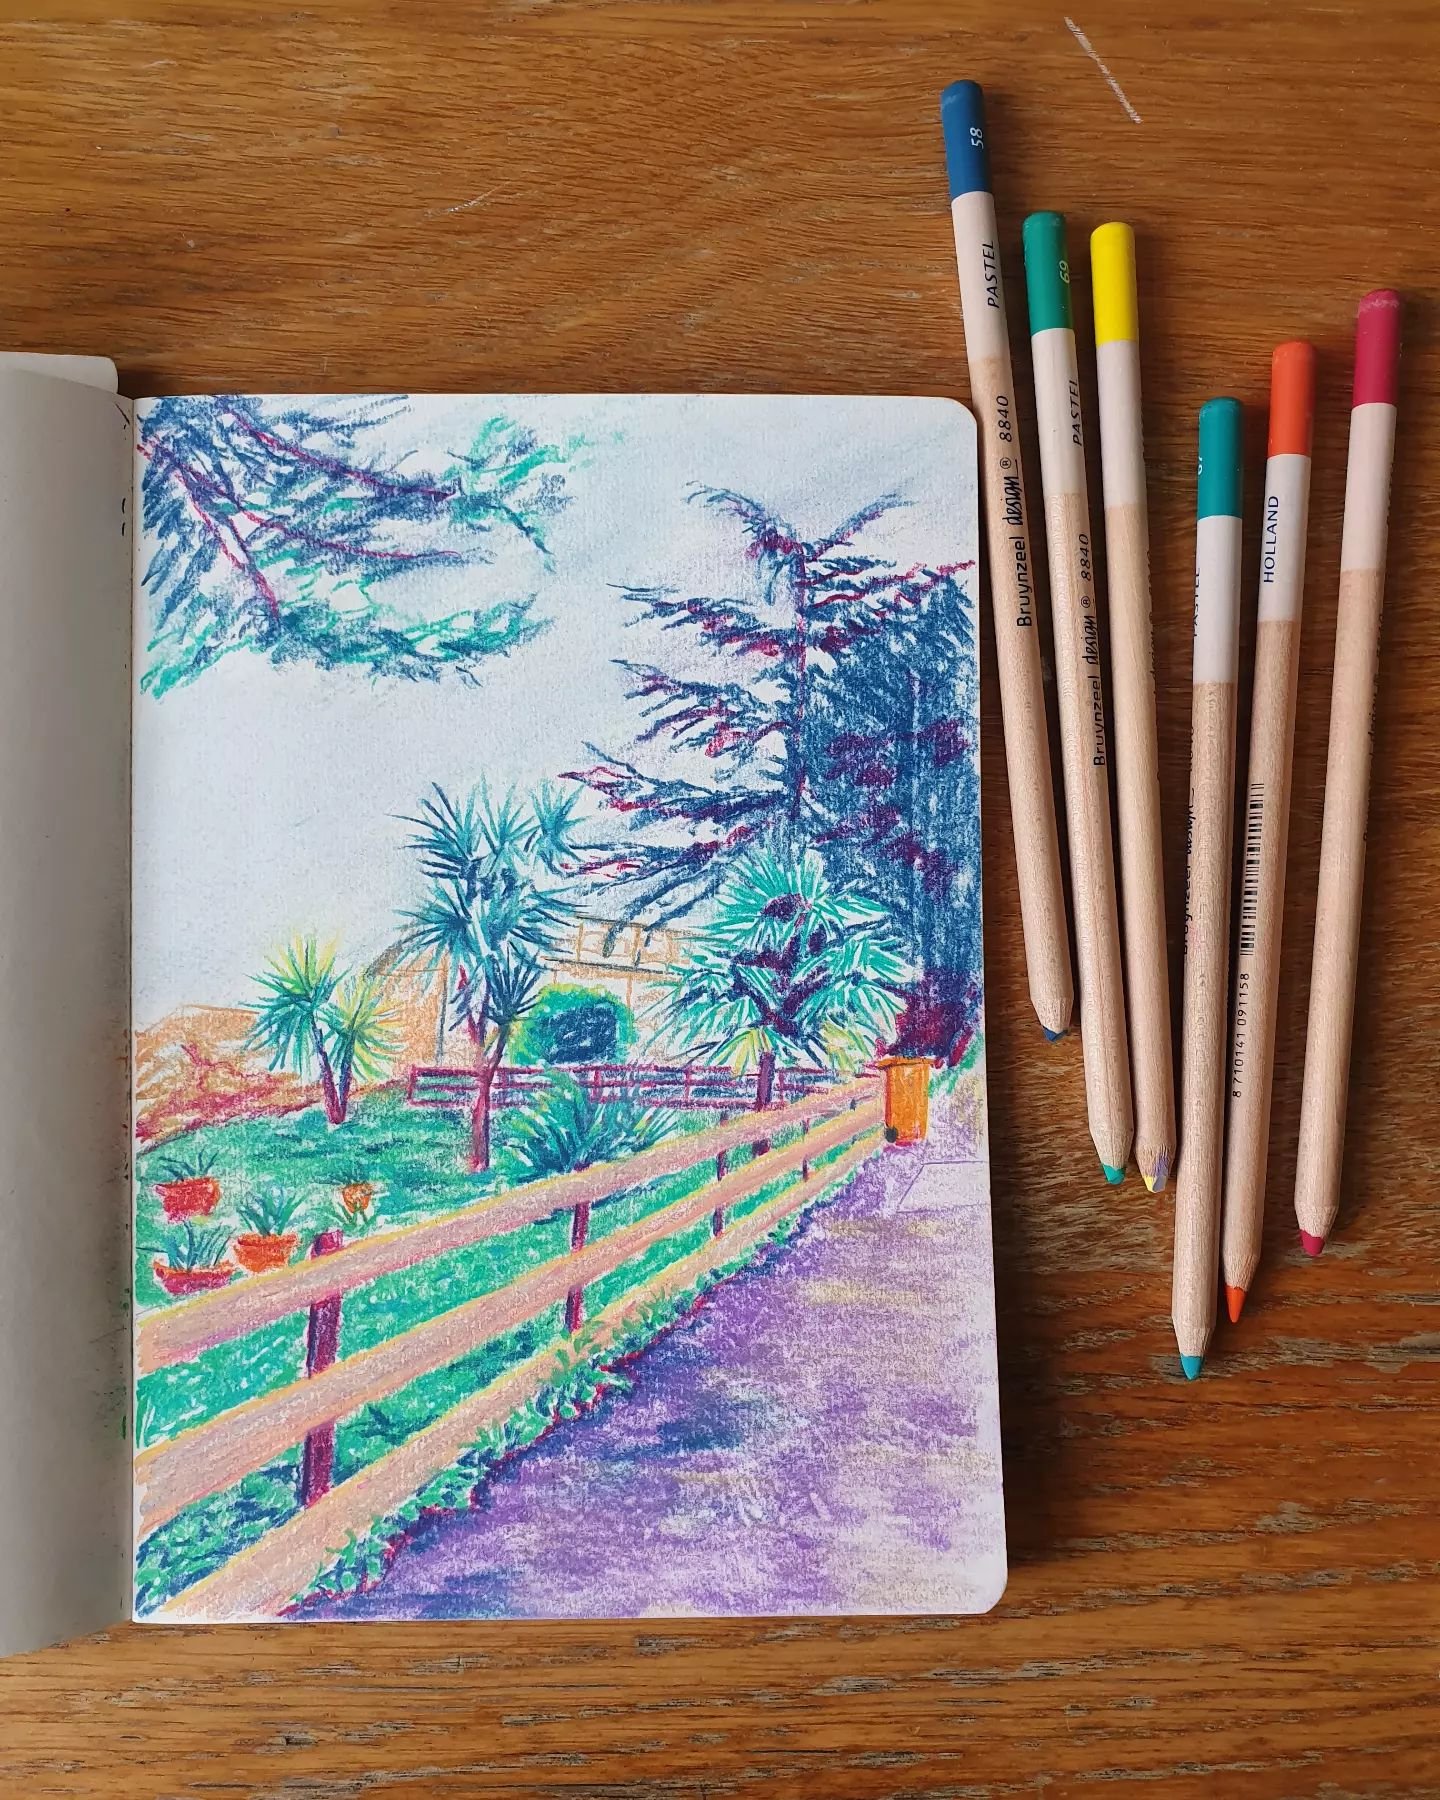 Having a little play around with pastel pencils. Its my first time using them. There's a lot to learn.....

#pastels #pastelpencils #sketchart #sketching #sketchbook #urbanart #urbannature #colourfulart #illustratedart